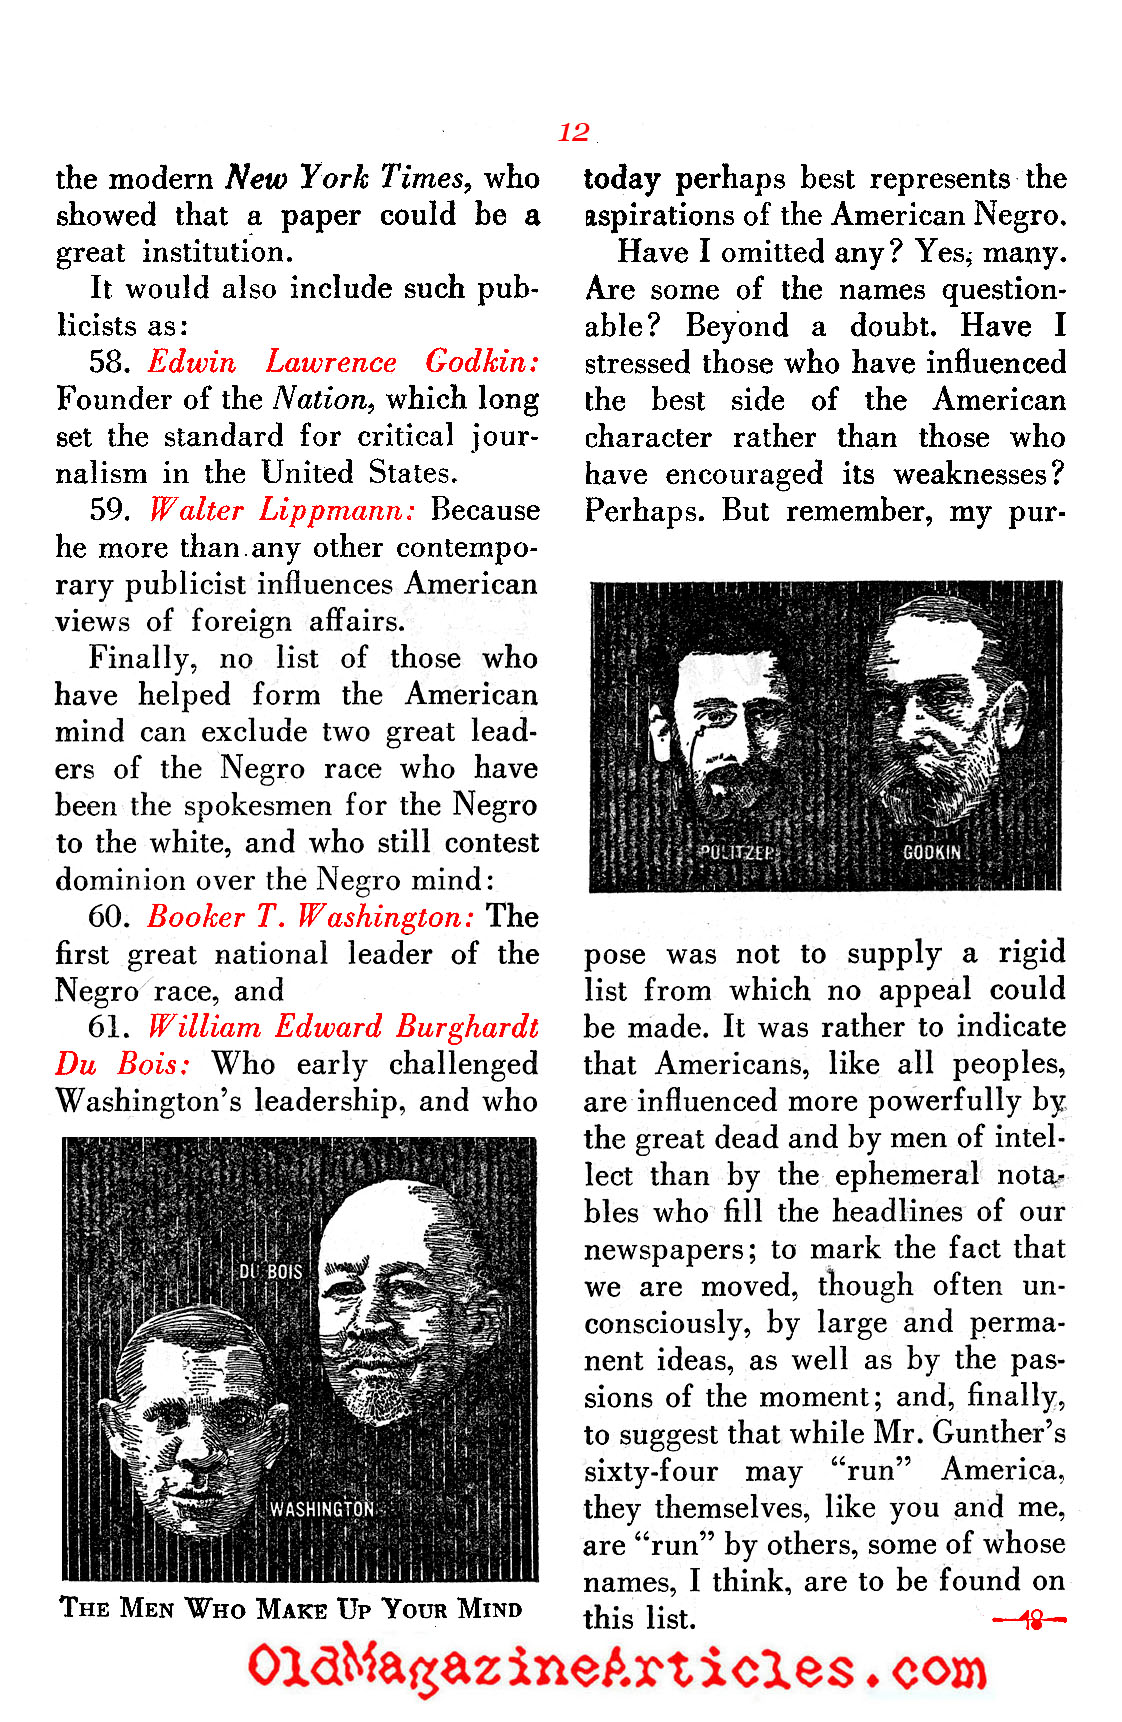 They Molded the American Mind ('48 Magazine, 1948)